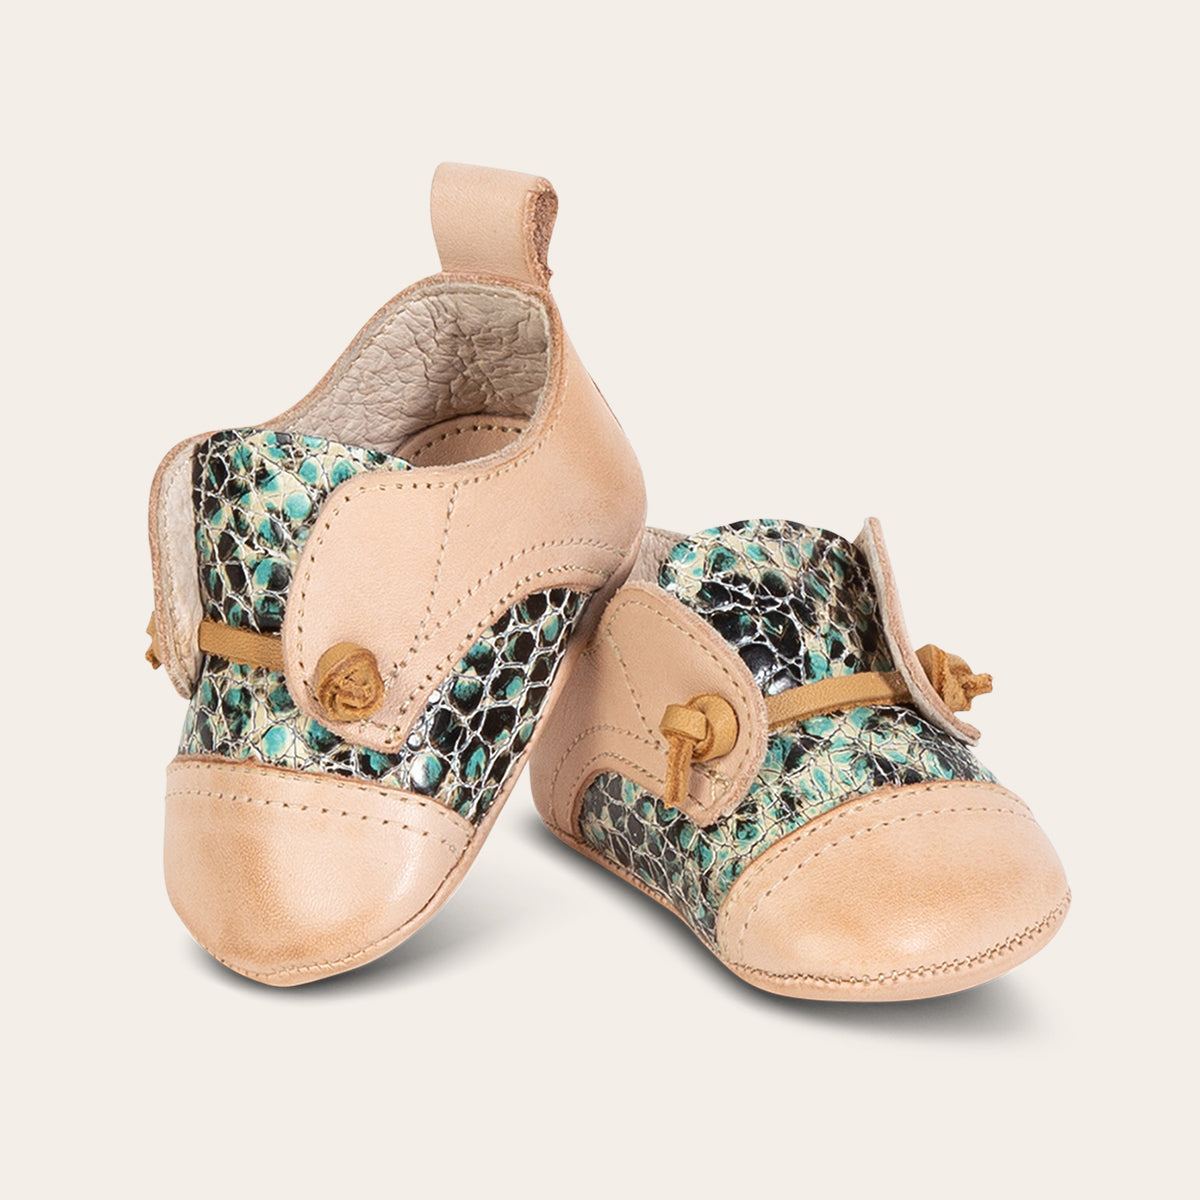 FREEBIRD infant baby Mabel turquoise multi leather shoe with decorative knotted leather lace and hidden inside elastic panel